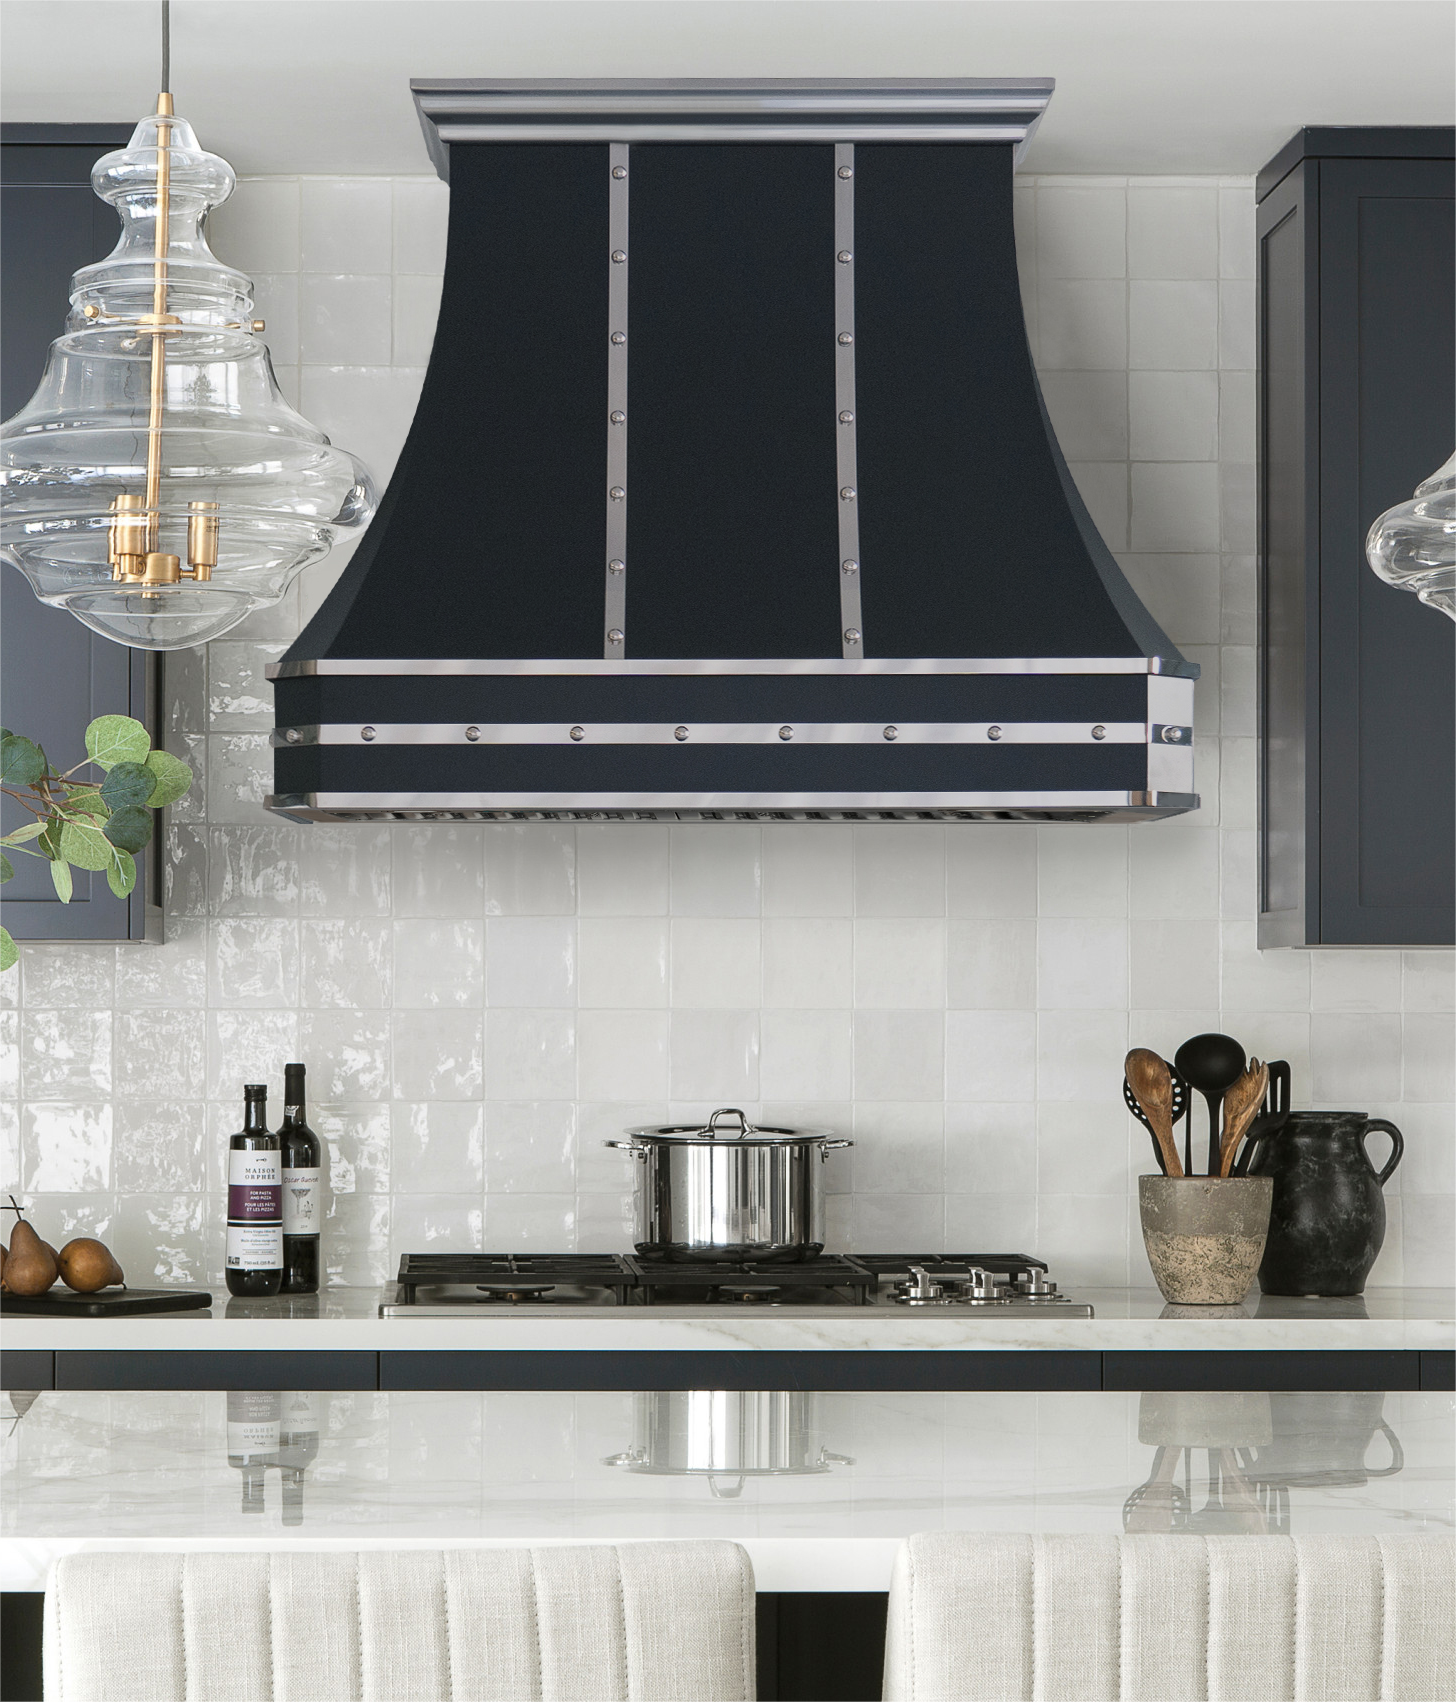 Fobest black stainless steel range hood with two straps and rivets